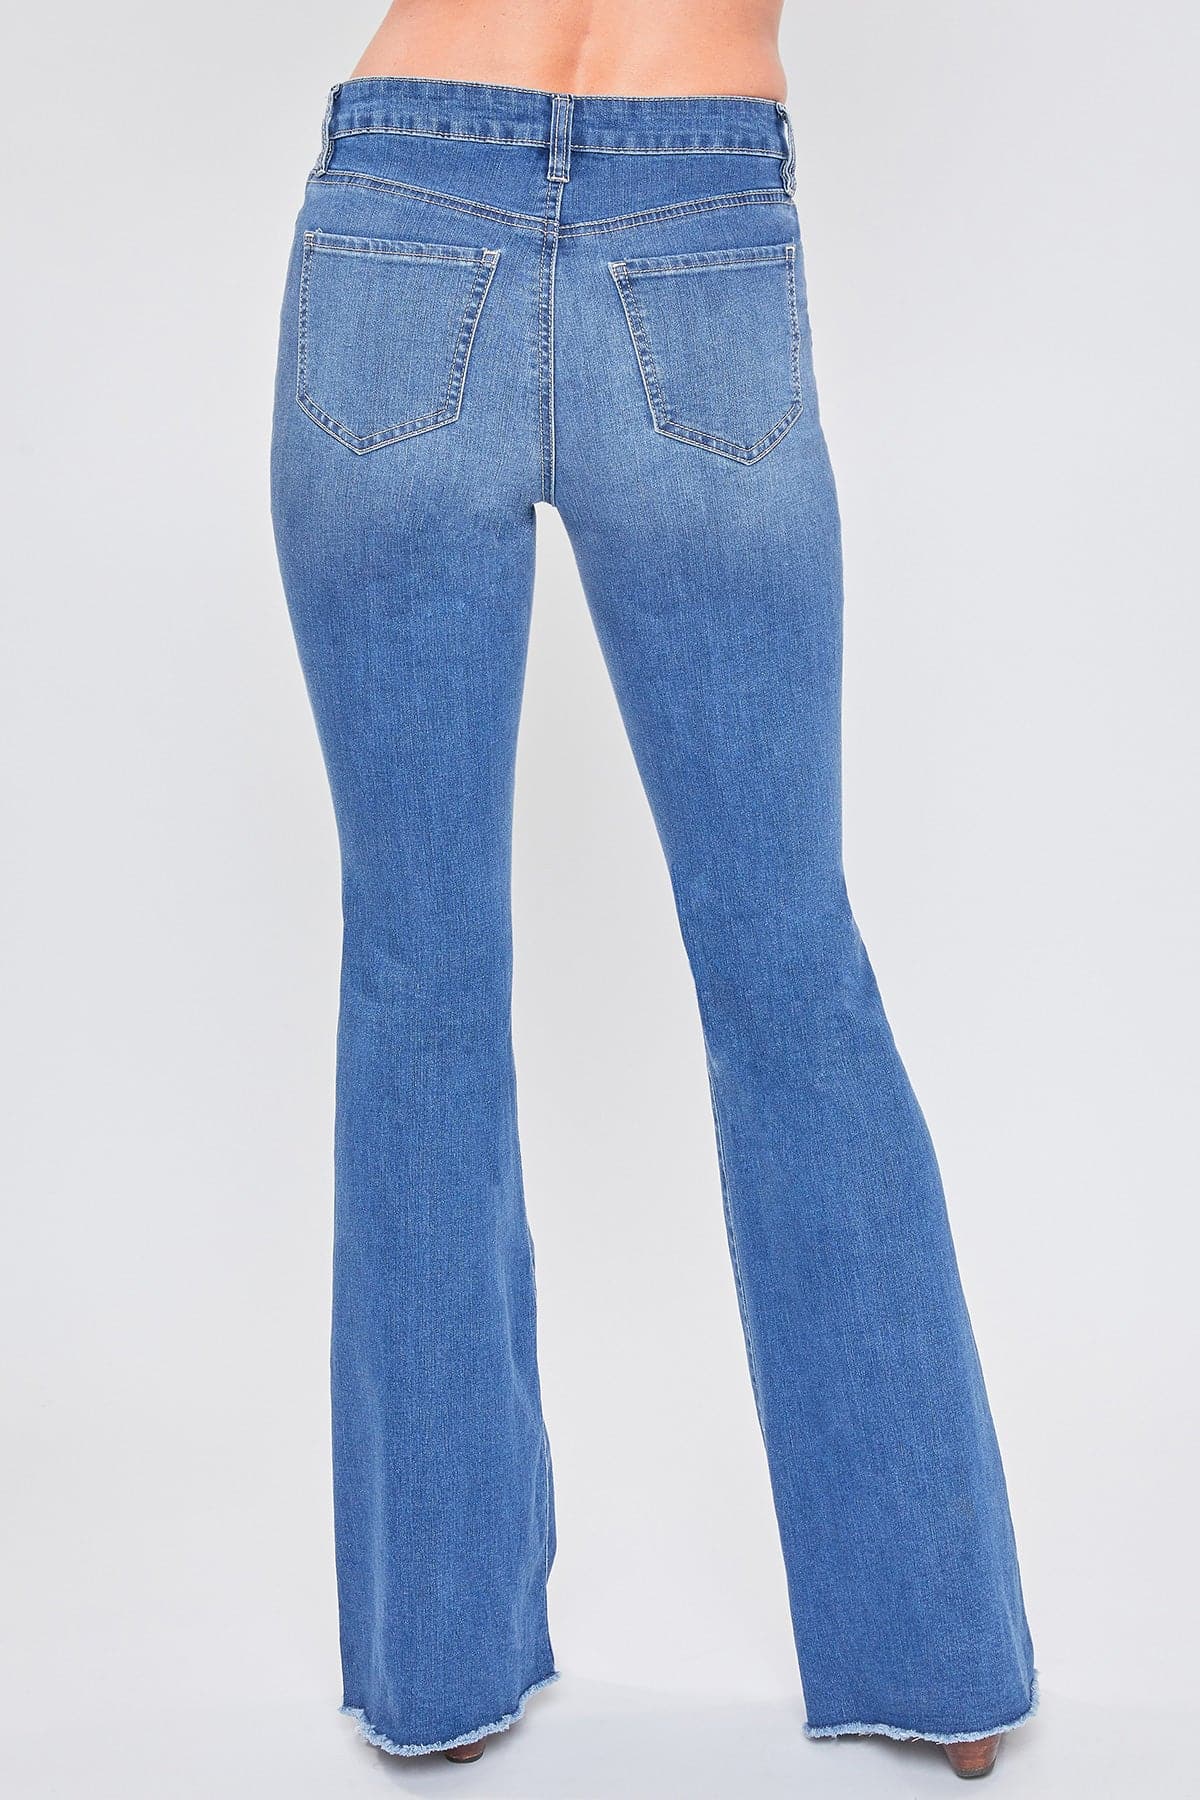 Women's Frayed Hem Flare Jeans With Curved Front Seam